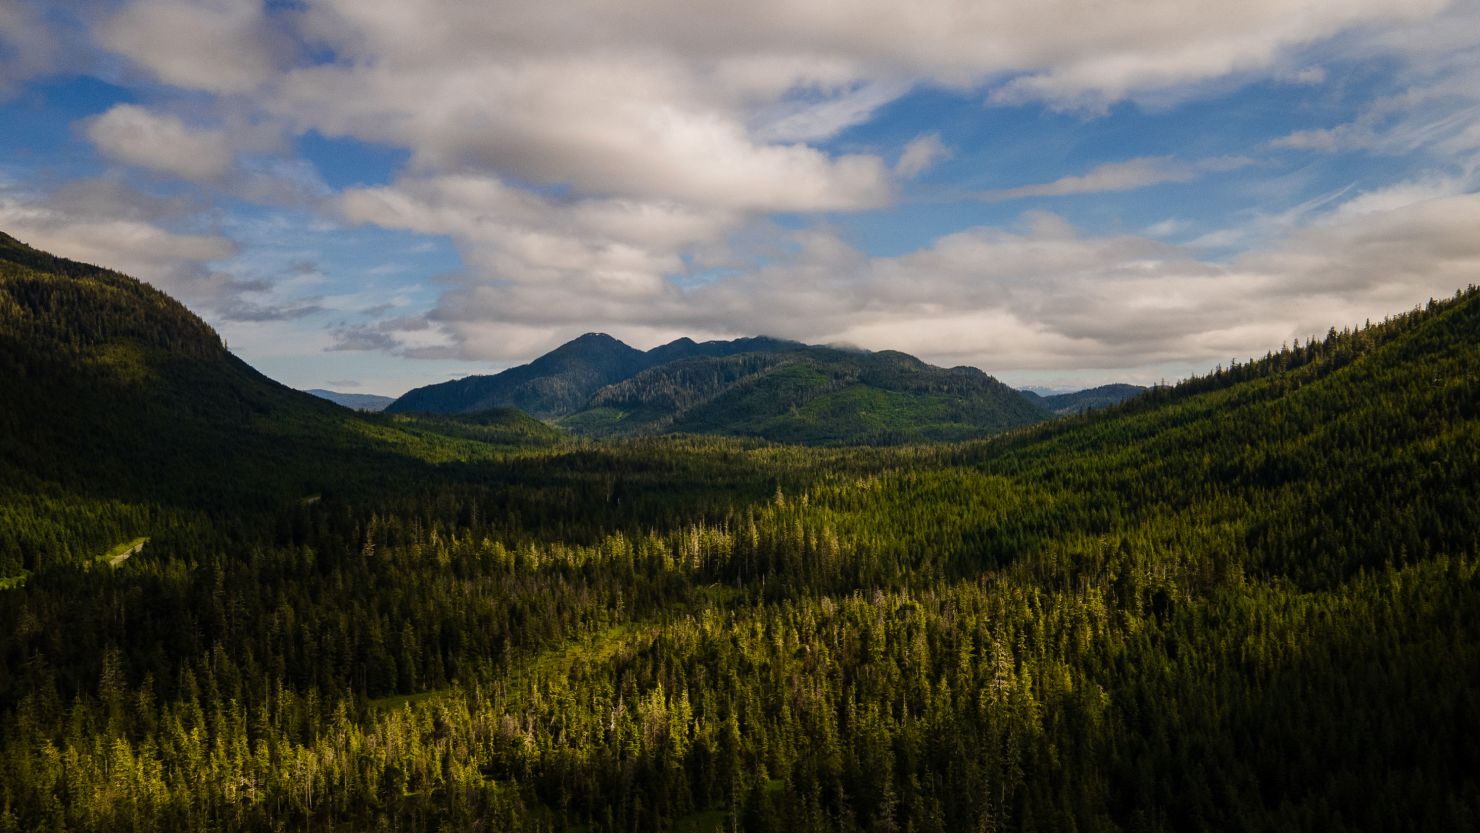 The Tongass National Forest on Prince of Wales Island, Alaska, on July 2, 2021.